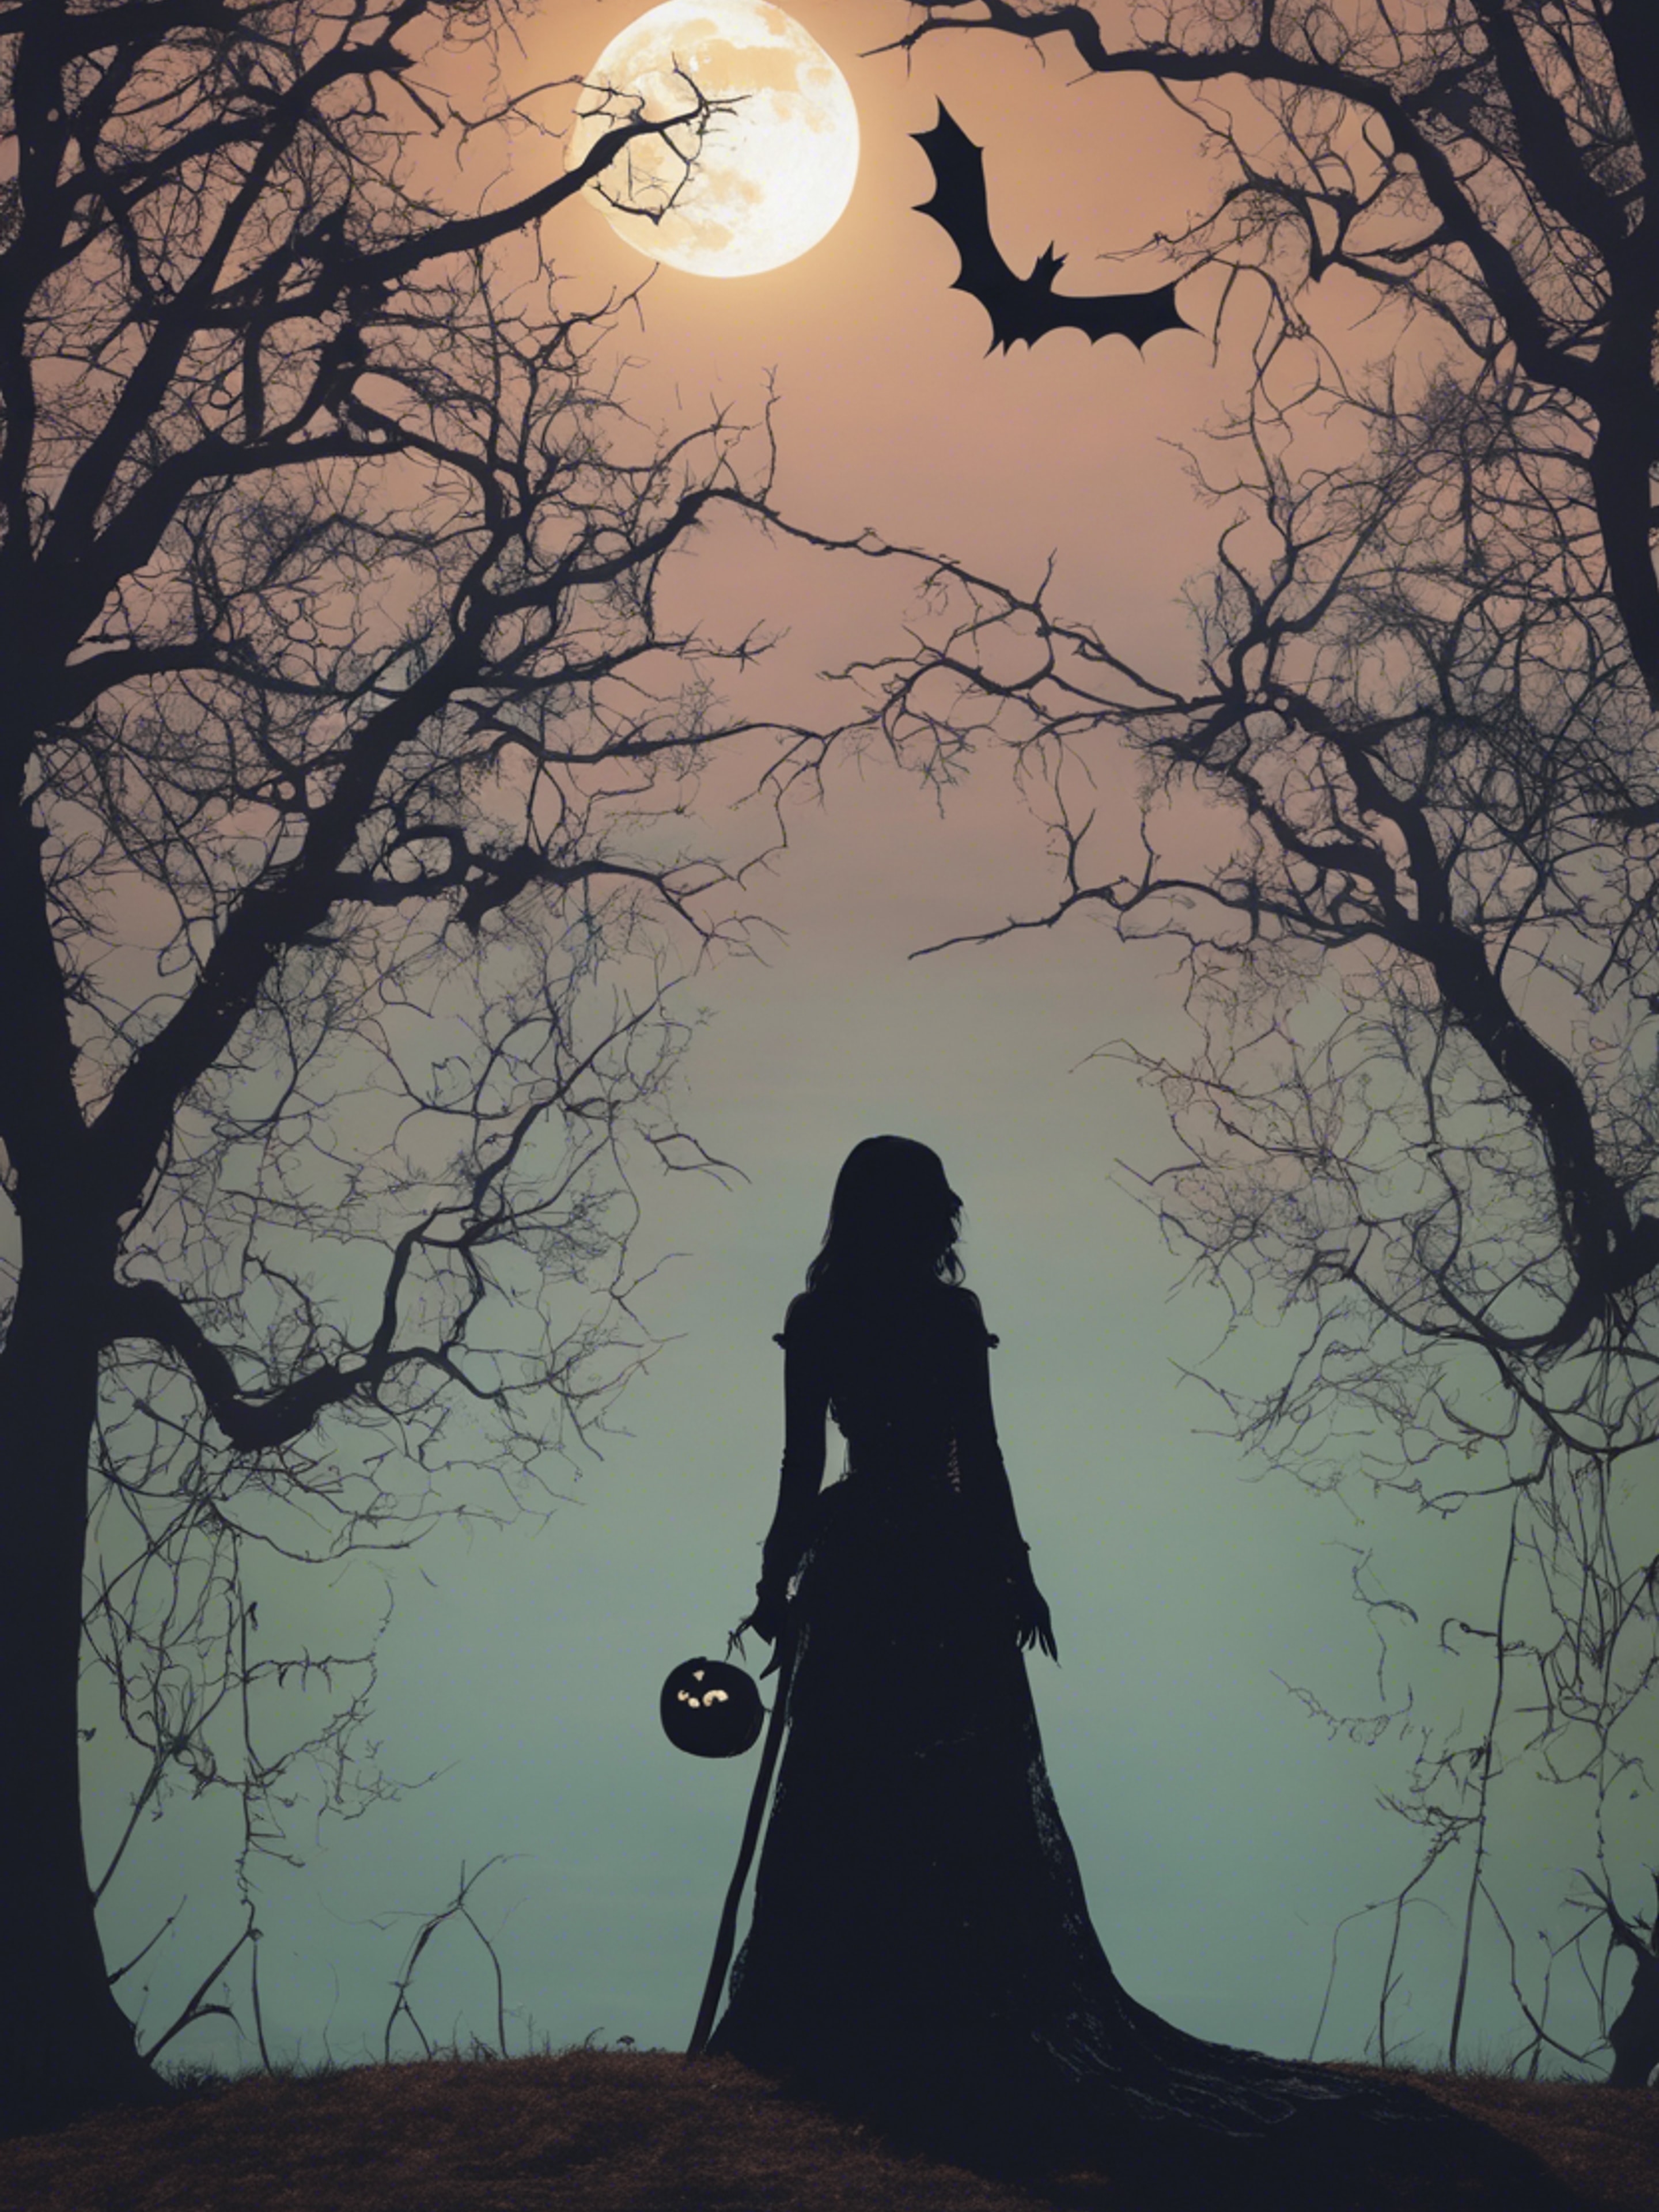 A pastel gothic art piece featuring a halloween-inspired silhouette against a full moon. Kertas dinding[0c56d77b25284c4fbd1c]